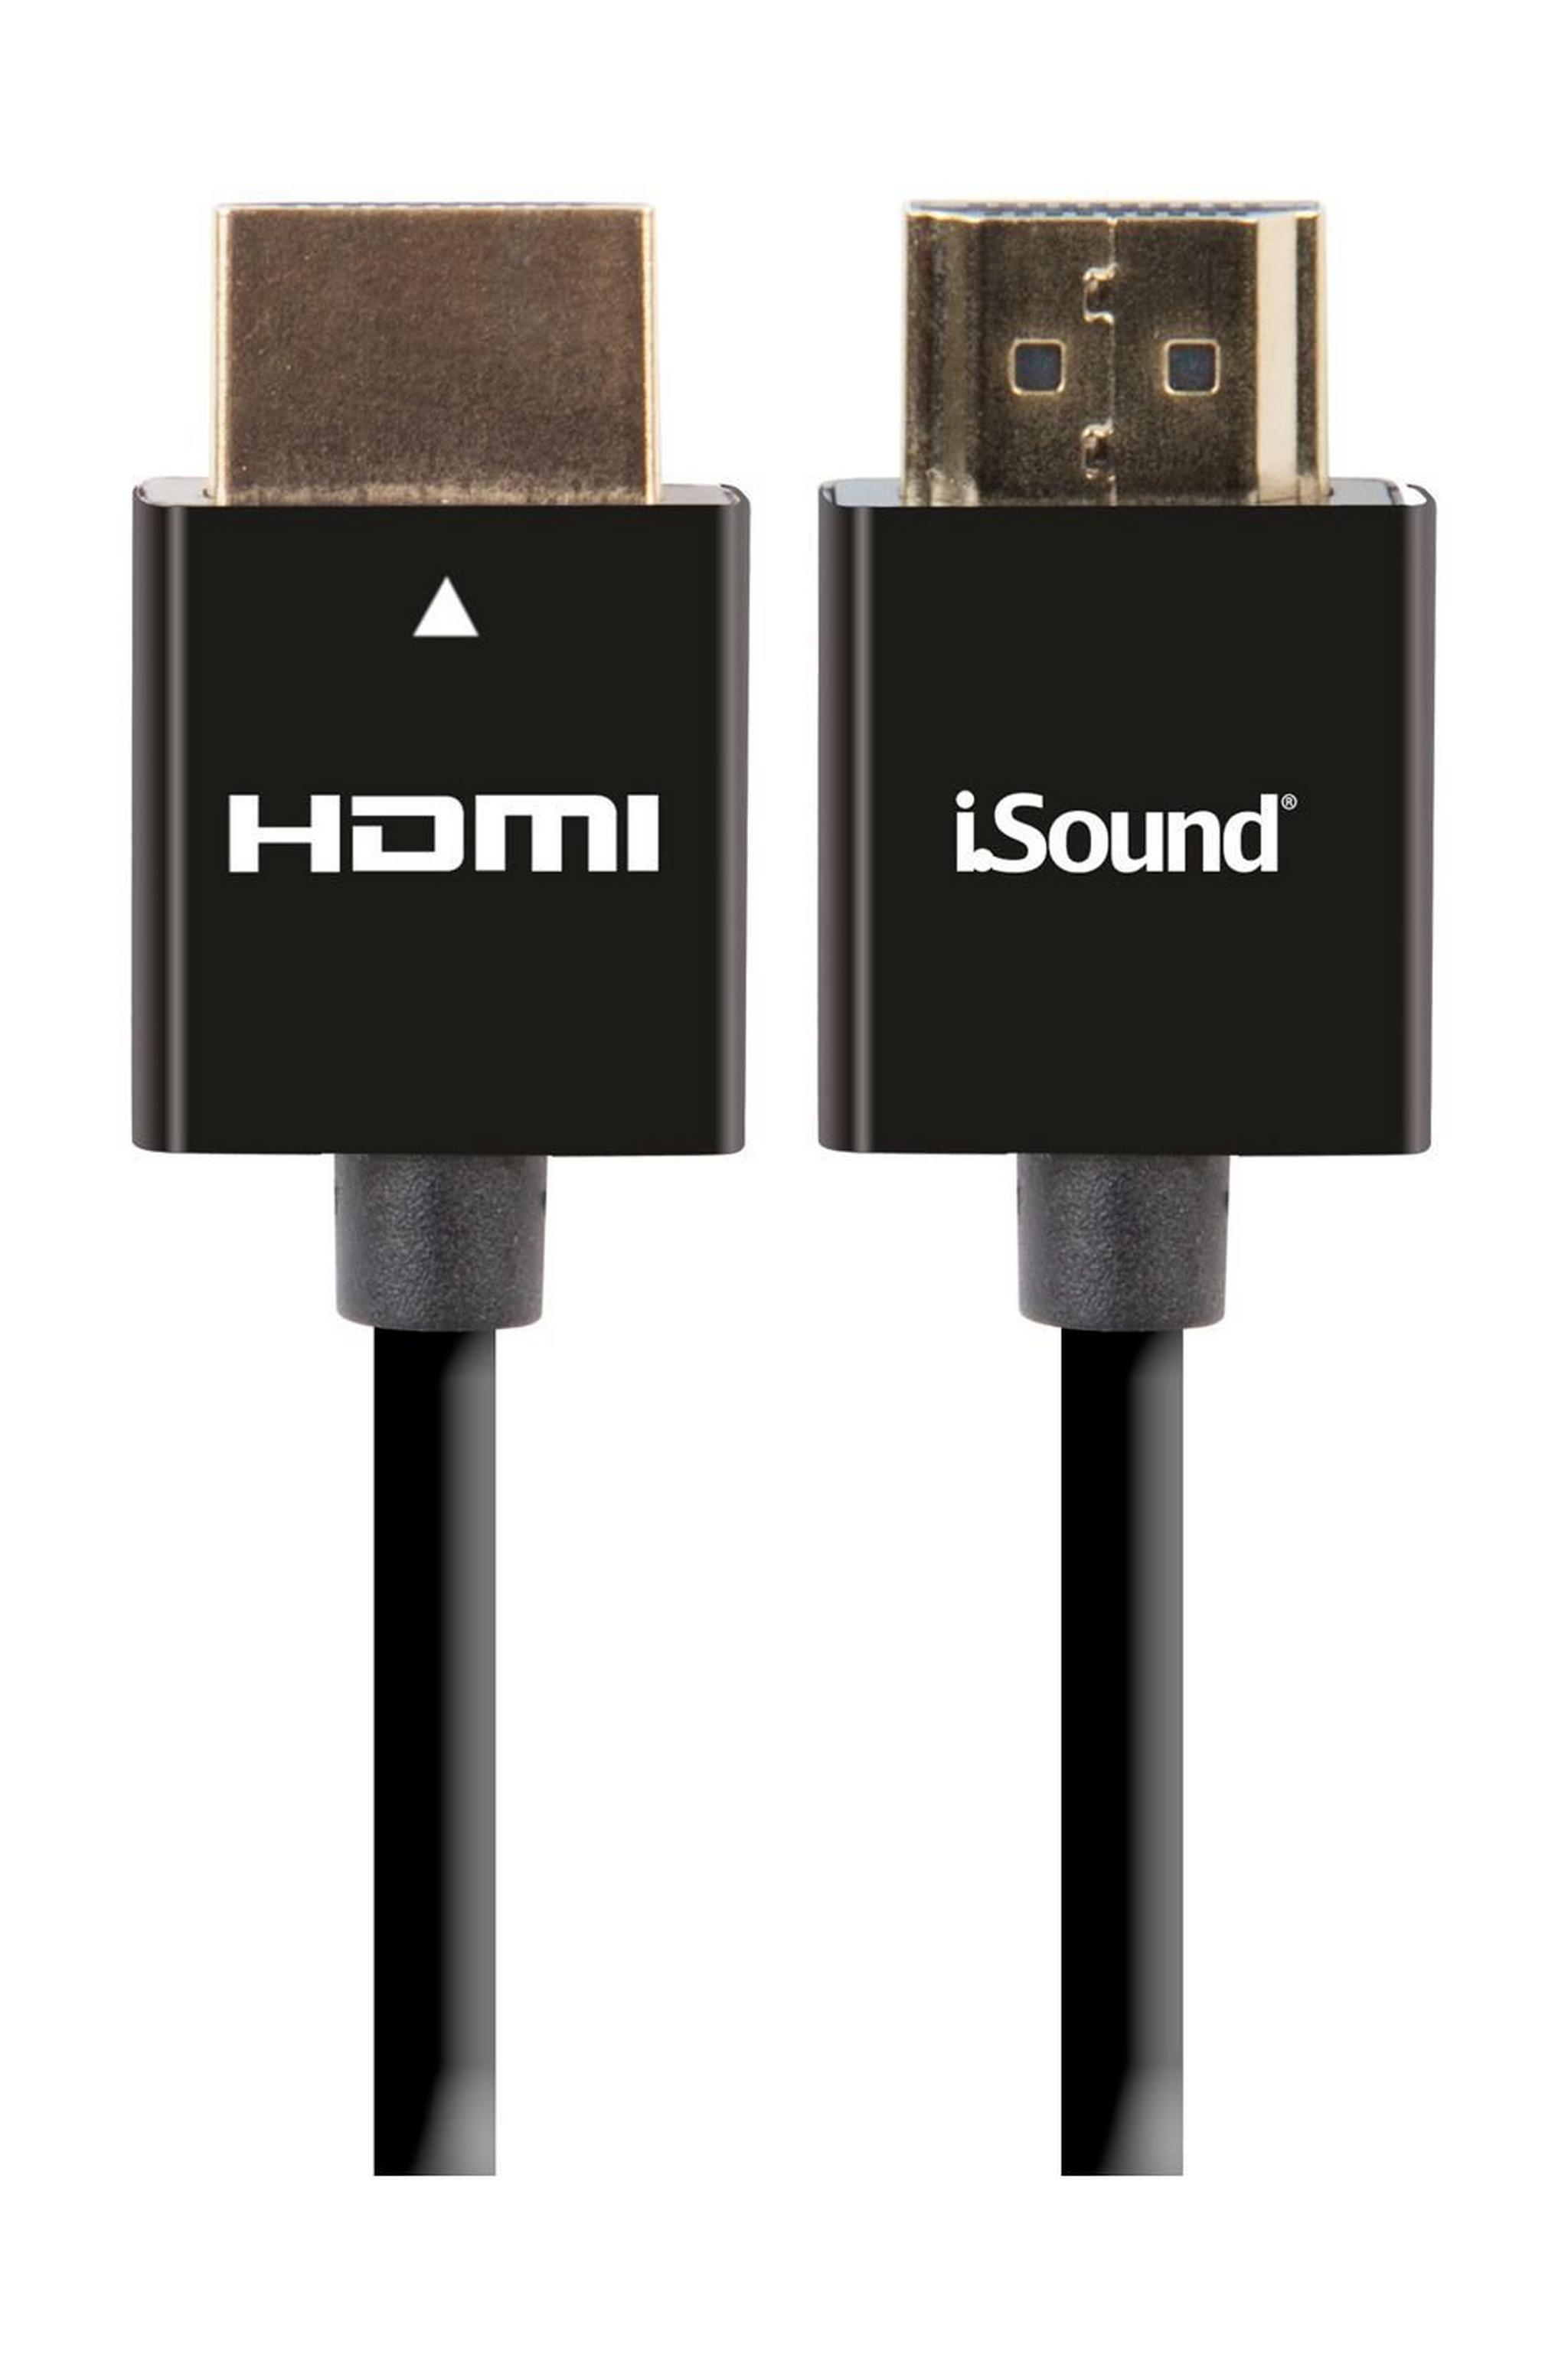 Dream Gear Super Slim HDMI Cable With Ethernet (ISOUND-5350) - Black